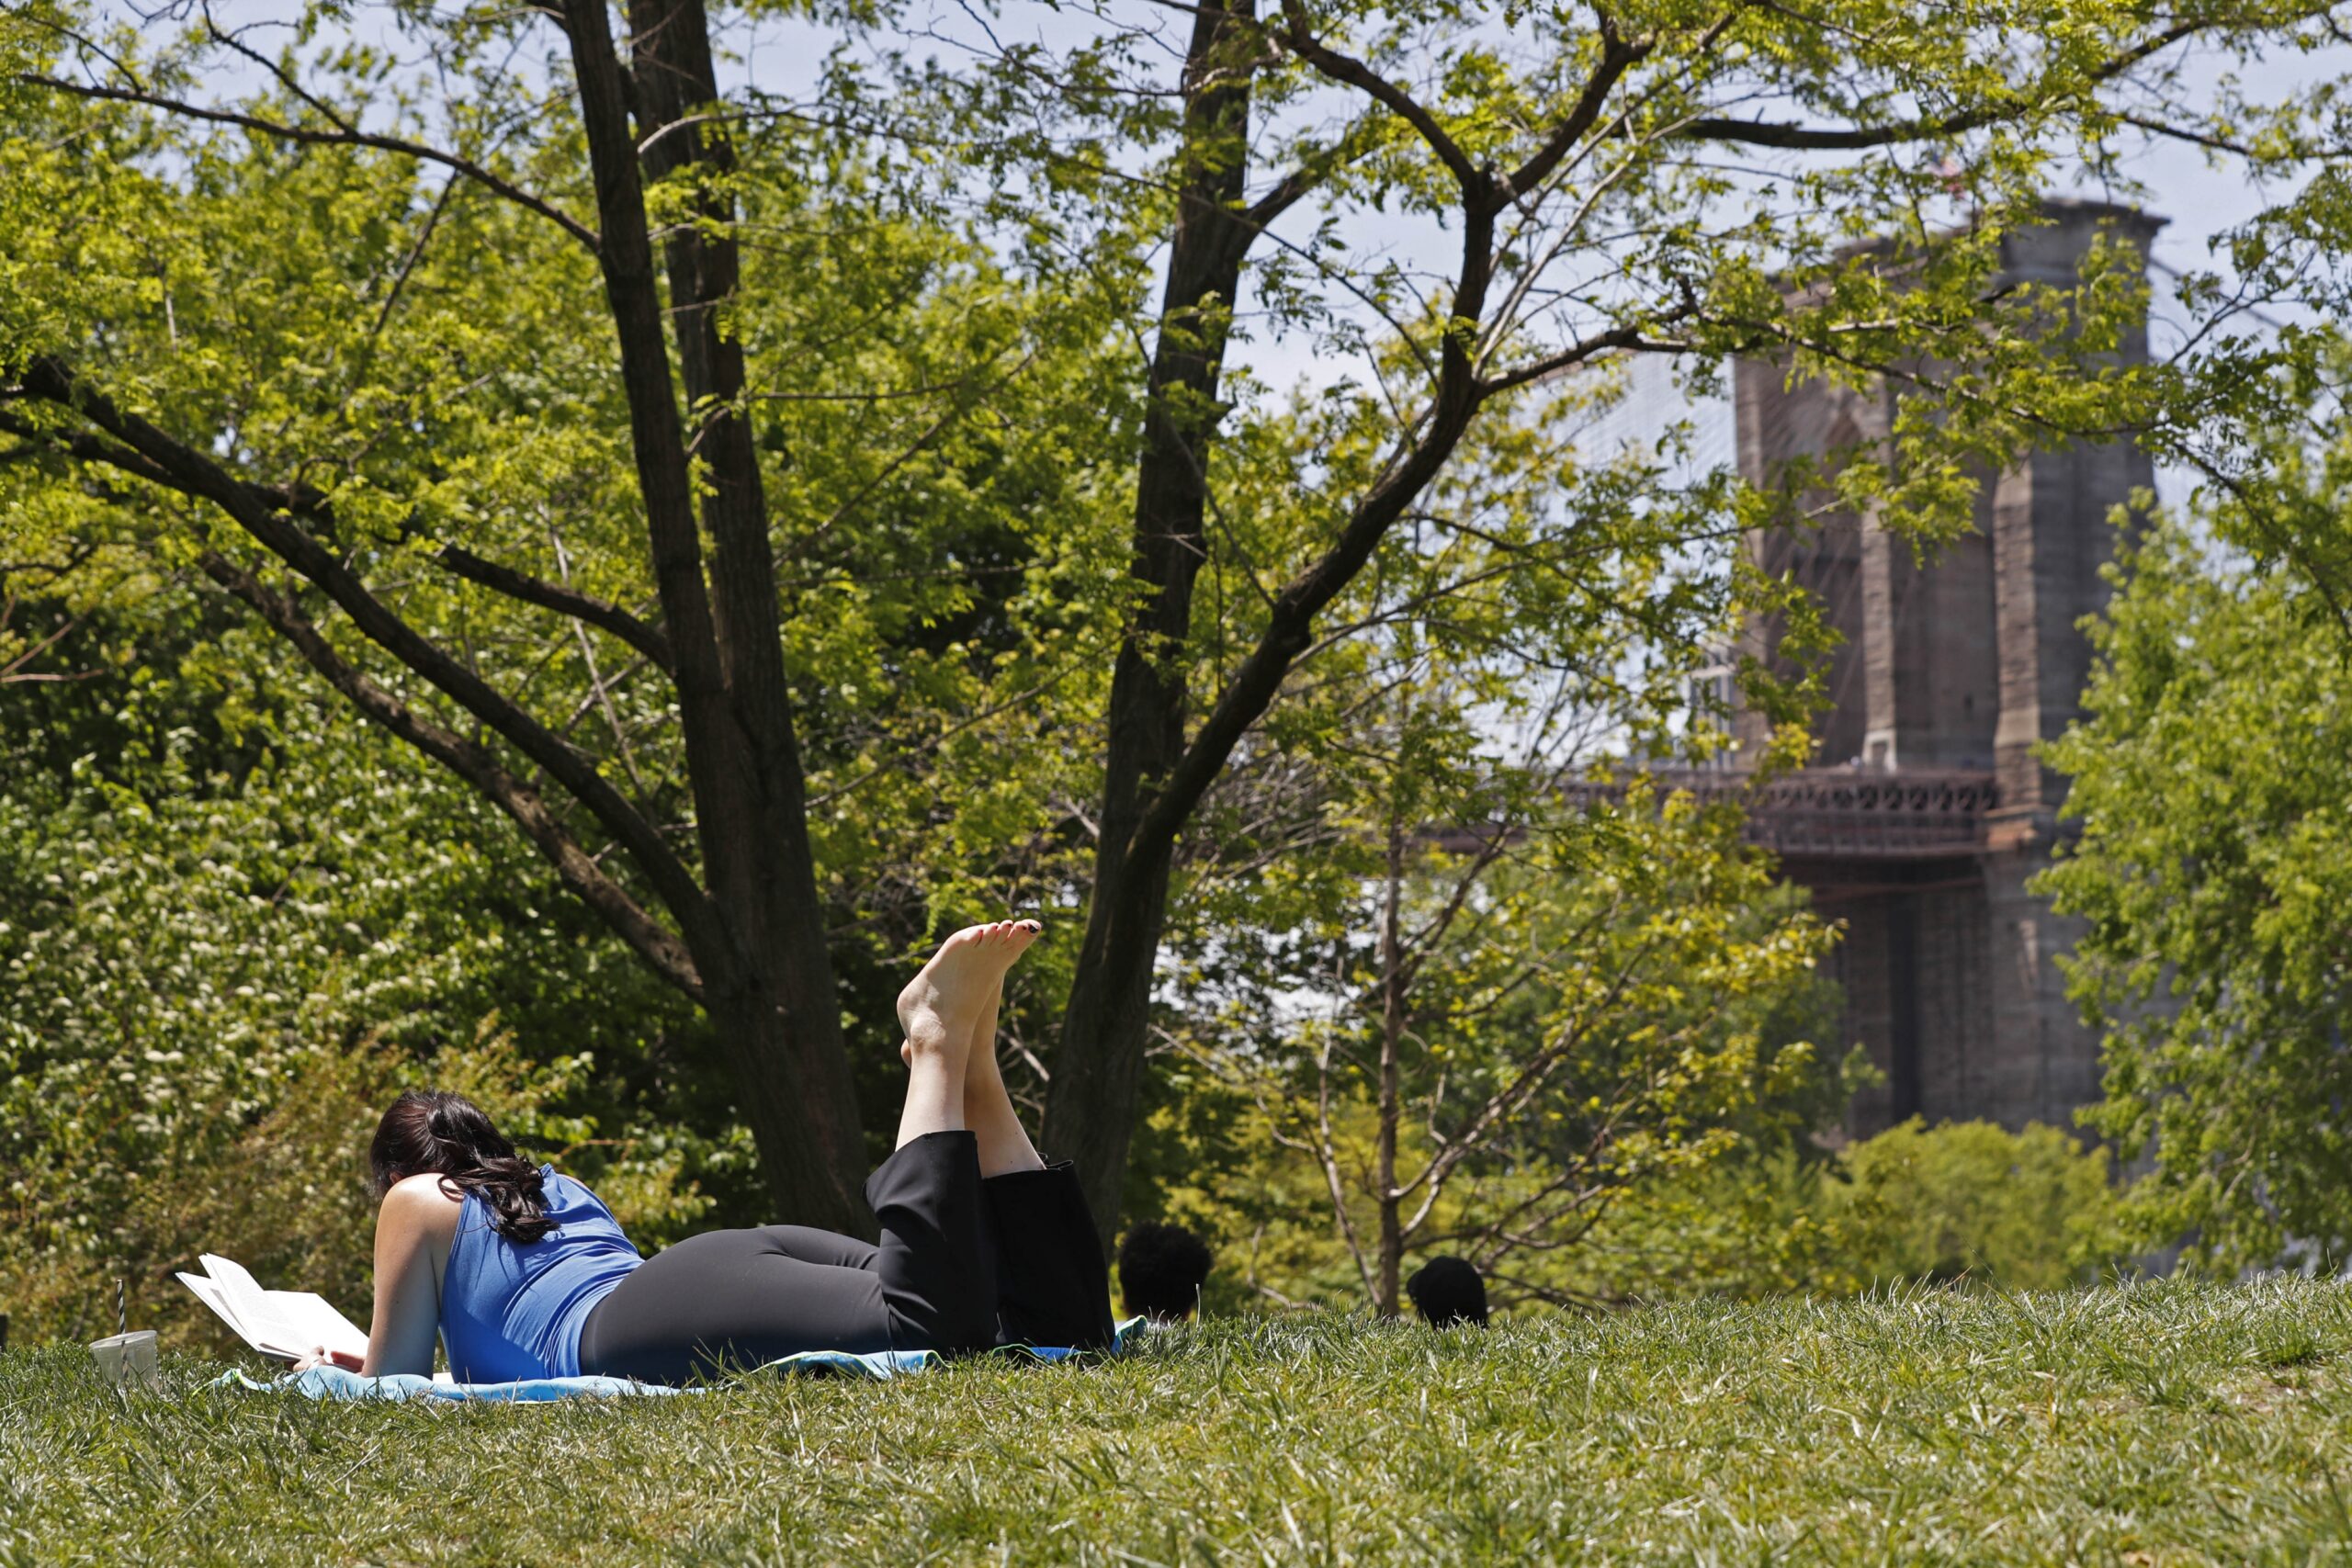 A woman reads a book while lying in the grass